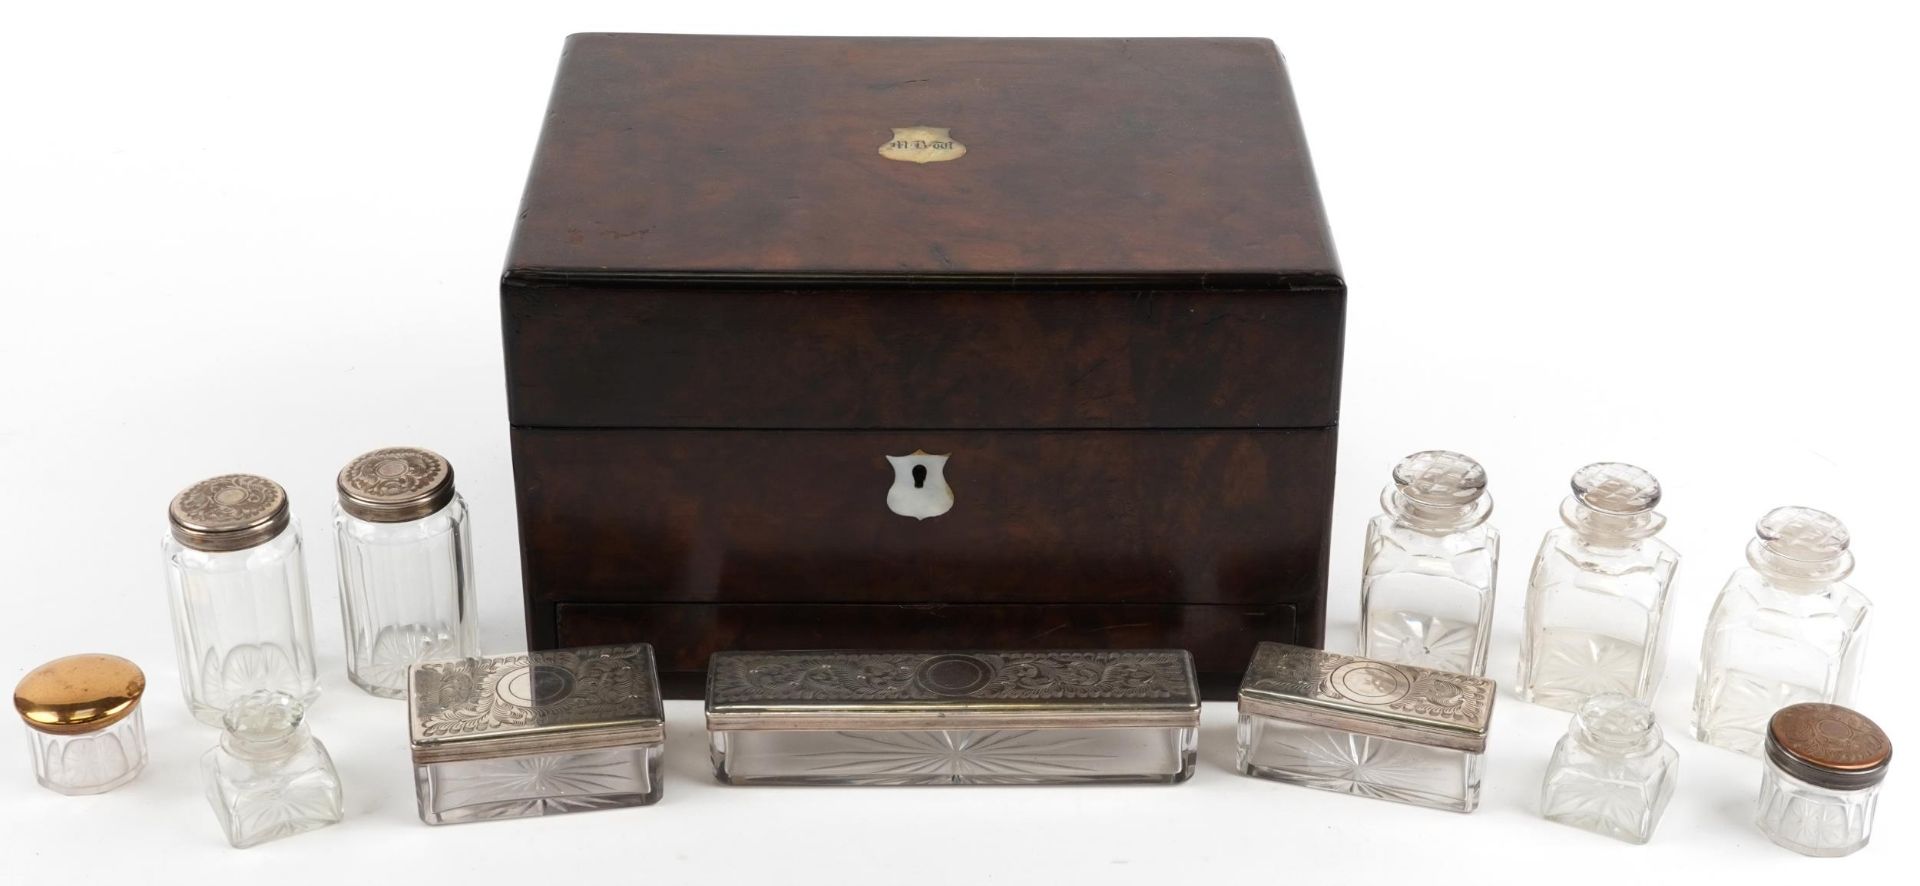 Victorian burr walnut toilet box with rosewood interior and base drawer housing various glass pots - Image 2 of 5